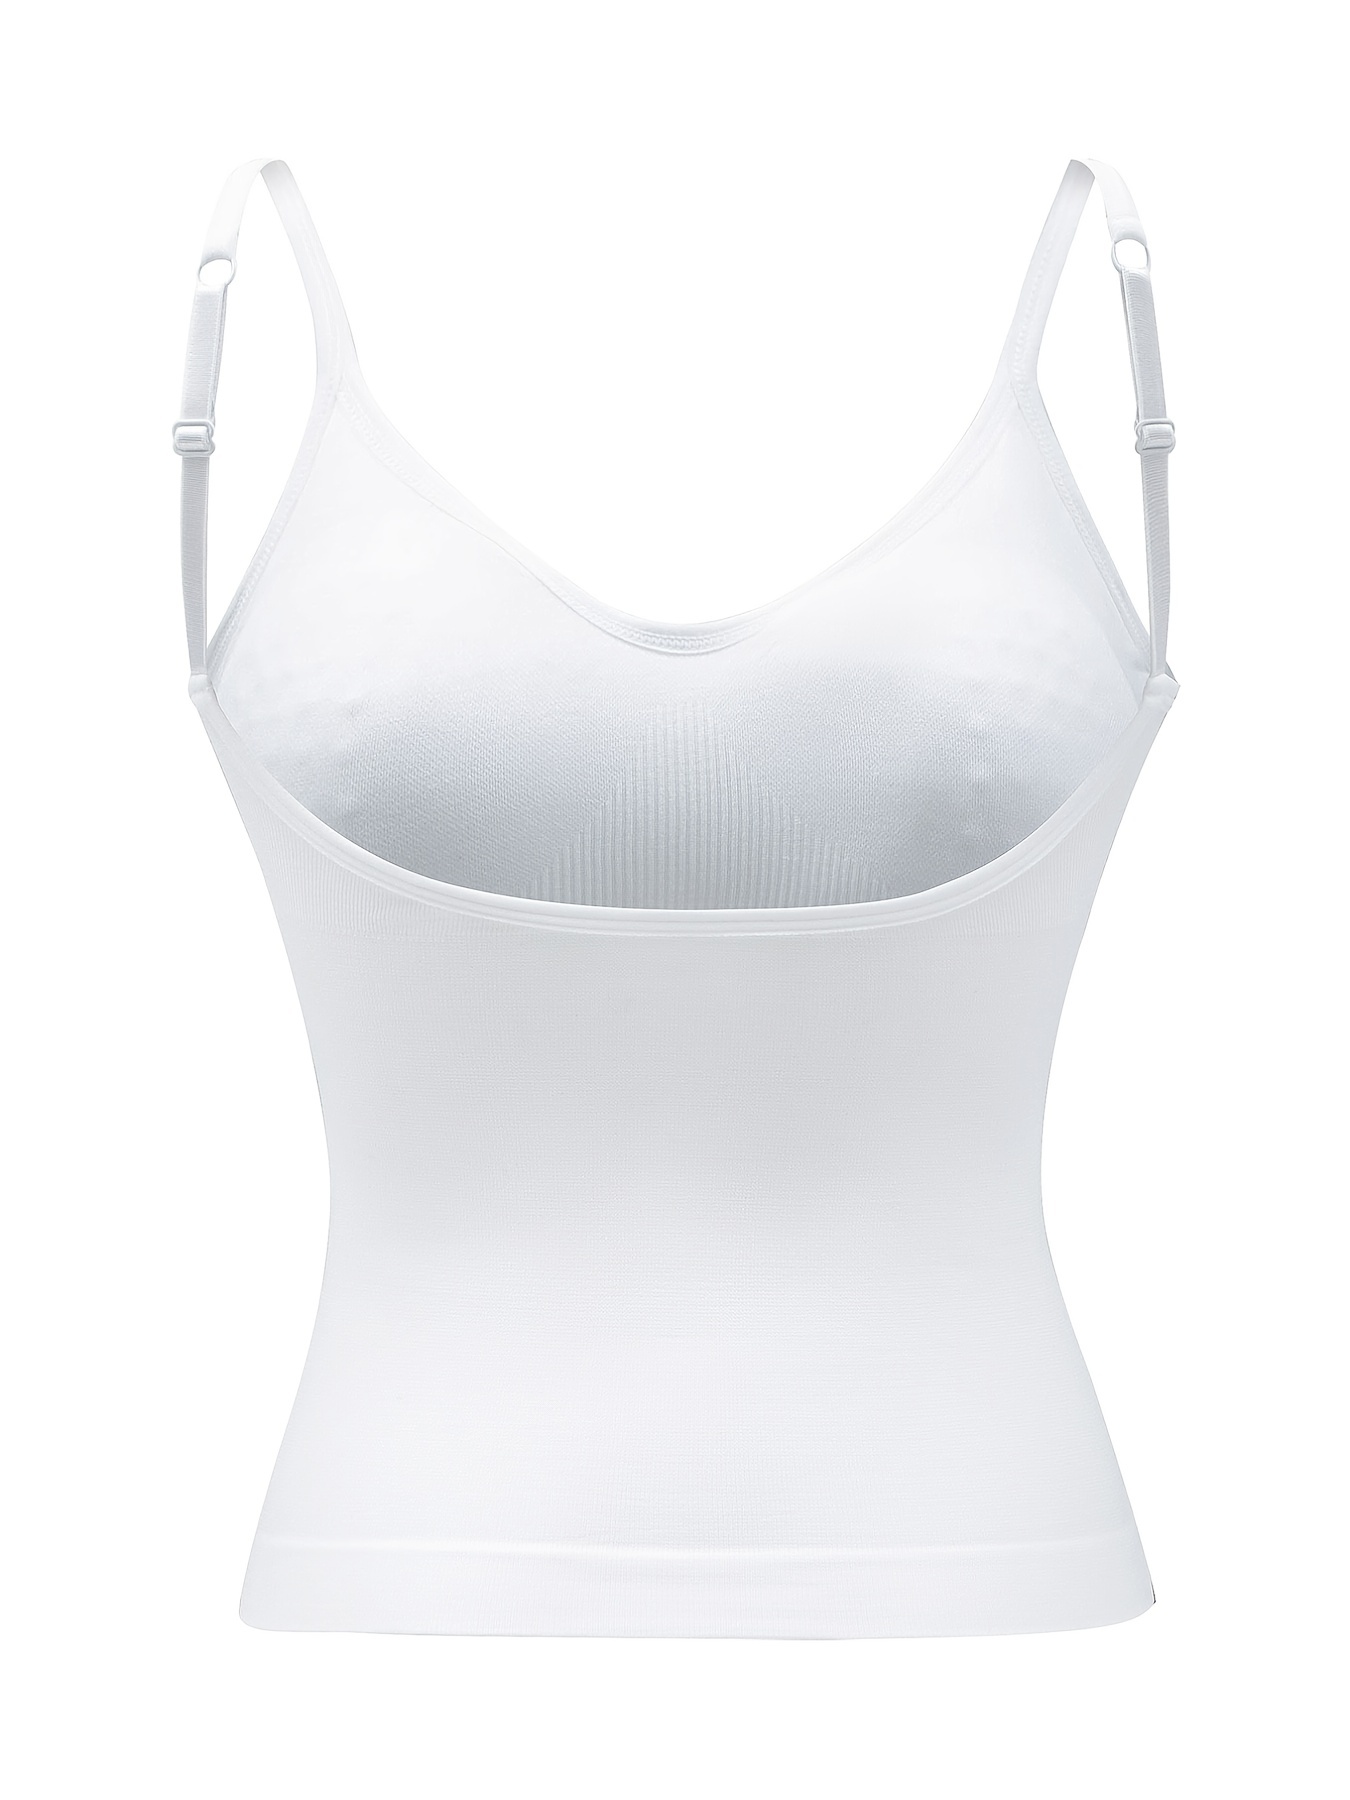 🌸Best Soft Padded White Camisole For Girls